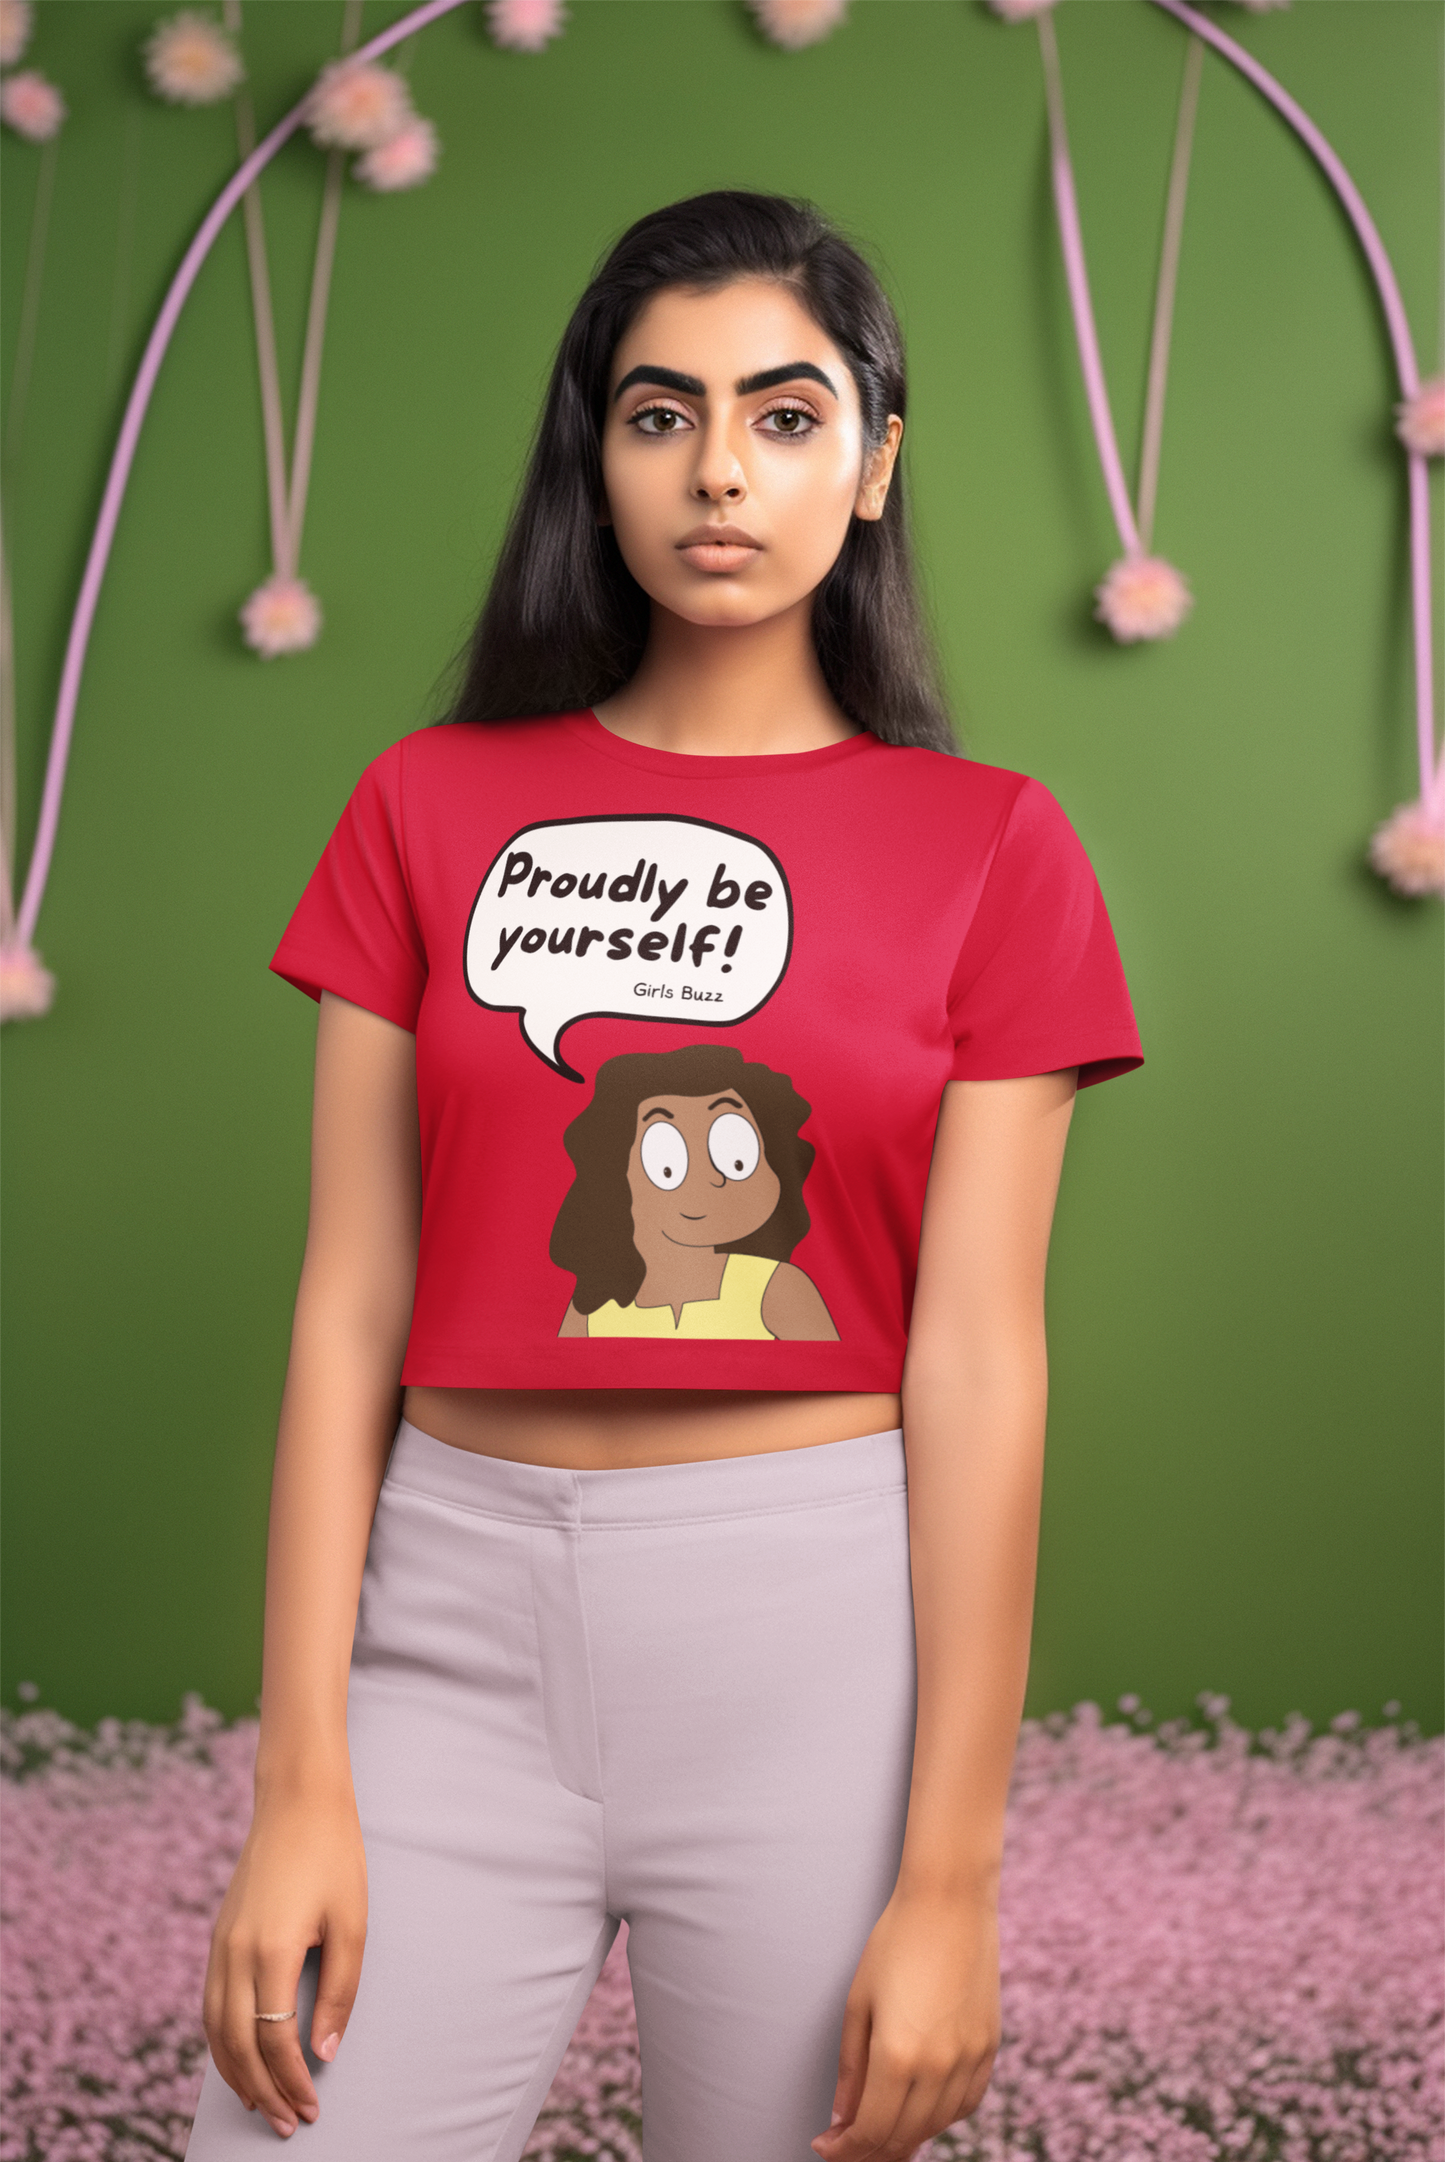 Proudly Be Yourself Crop Top